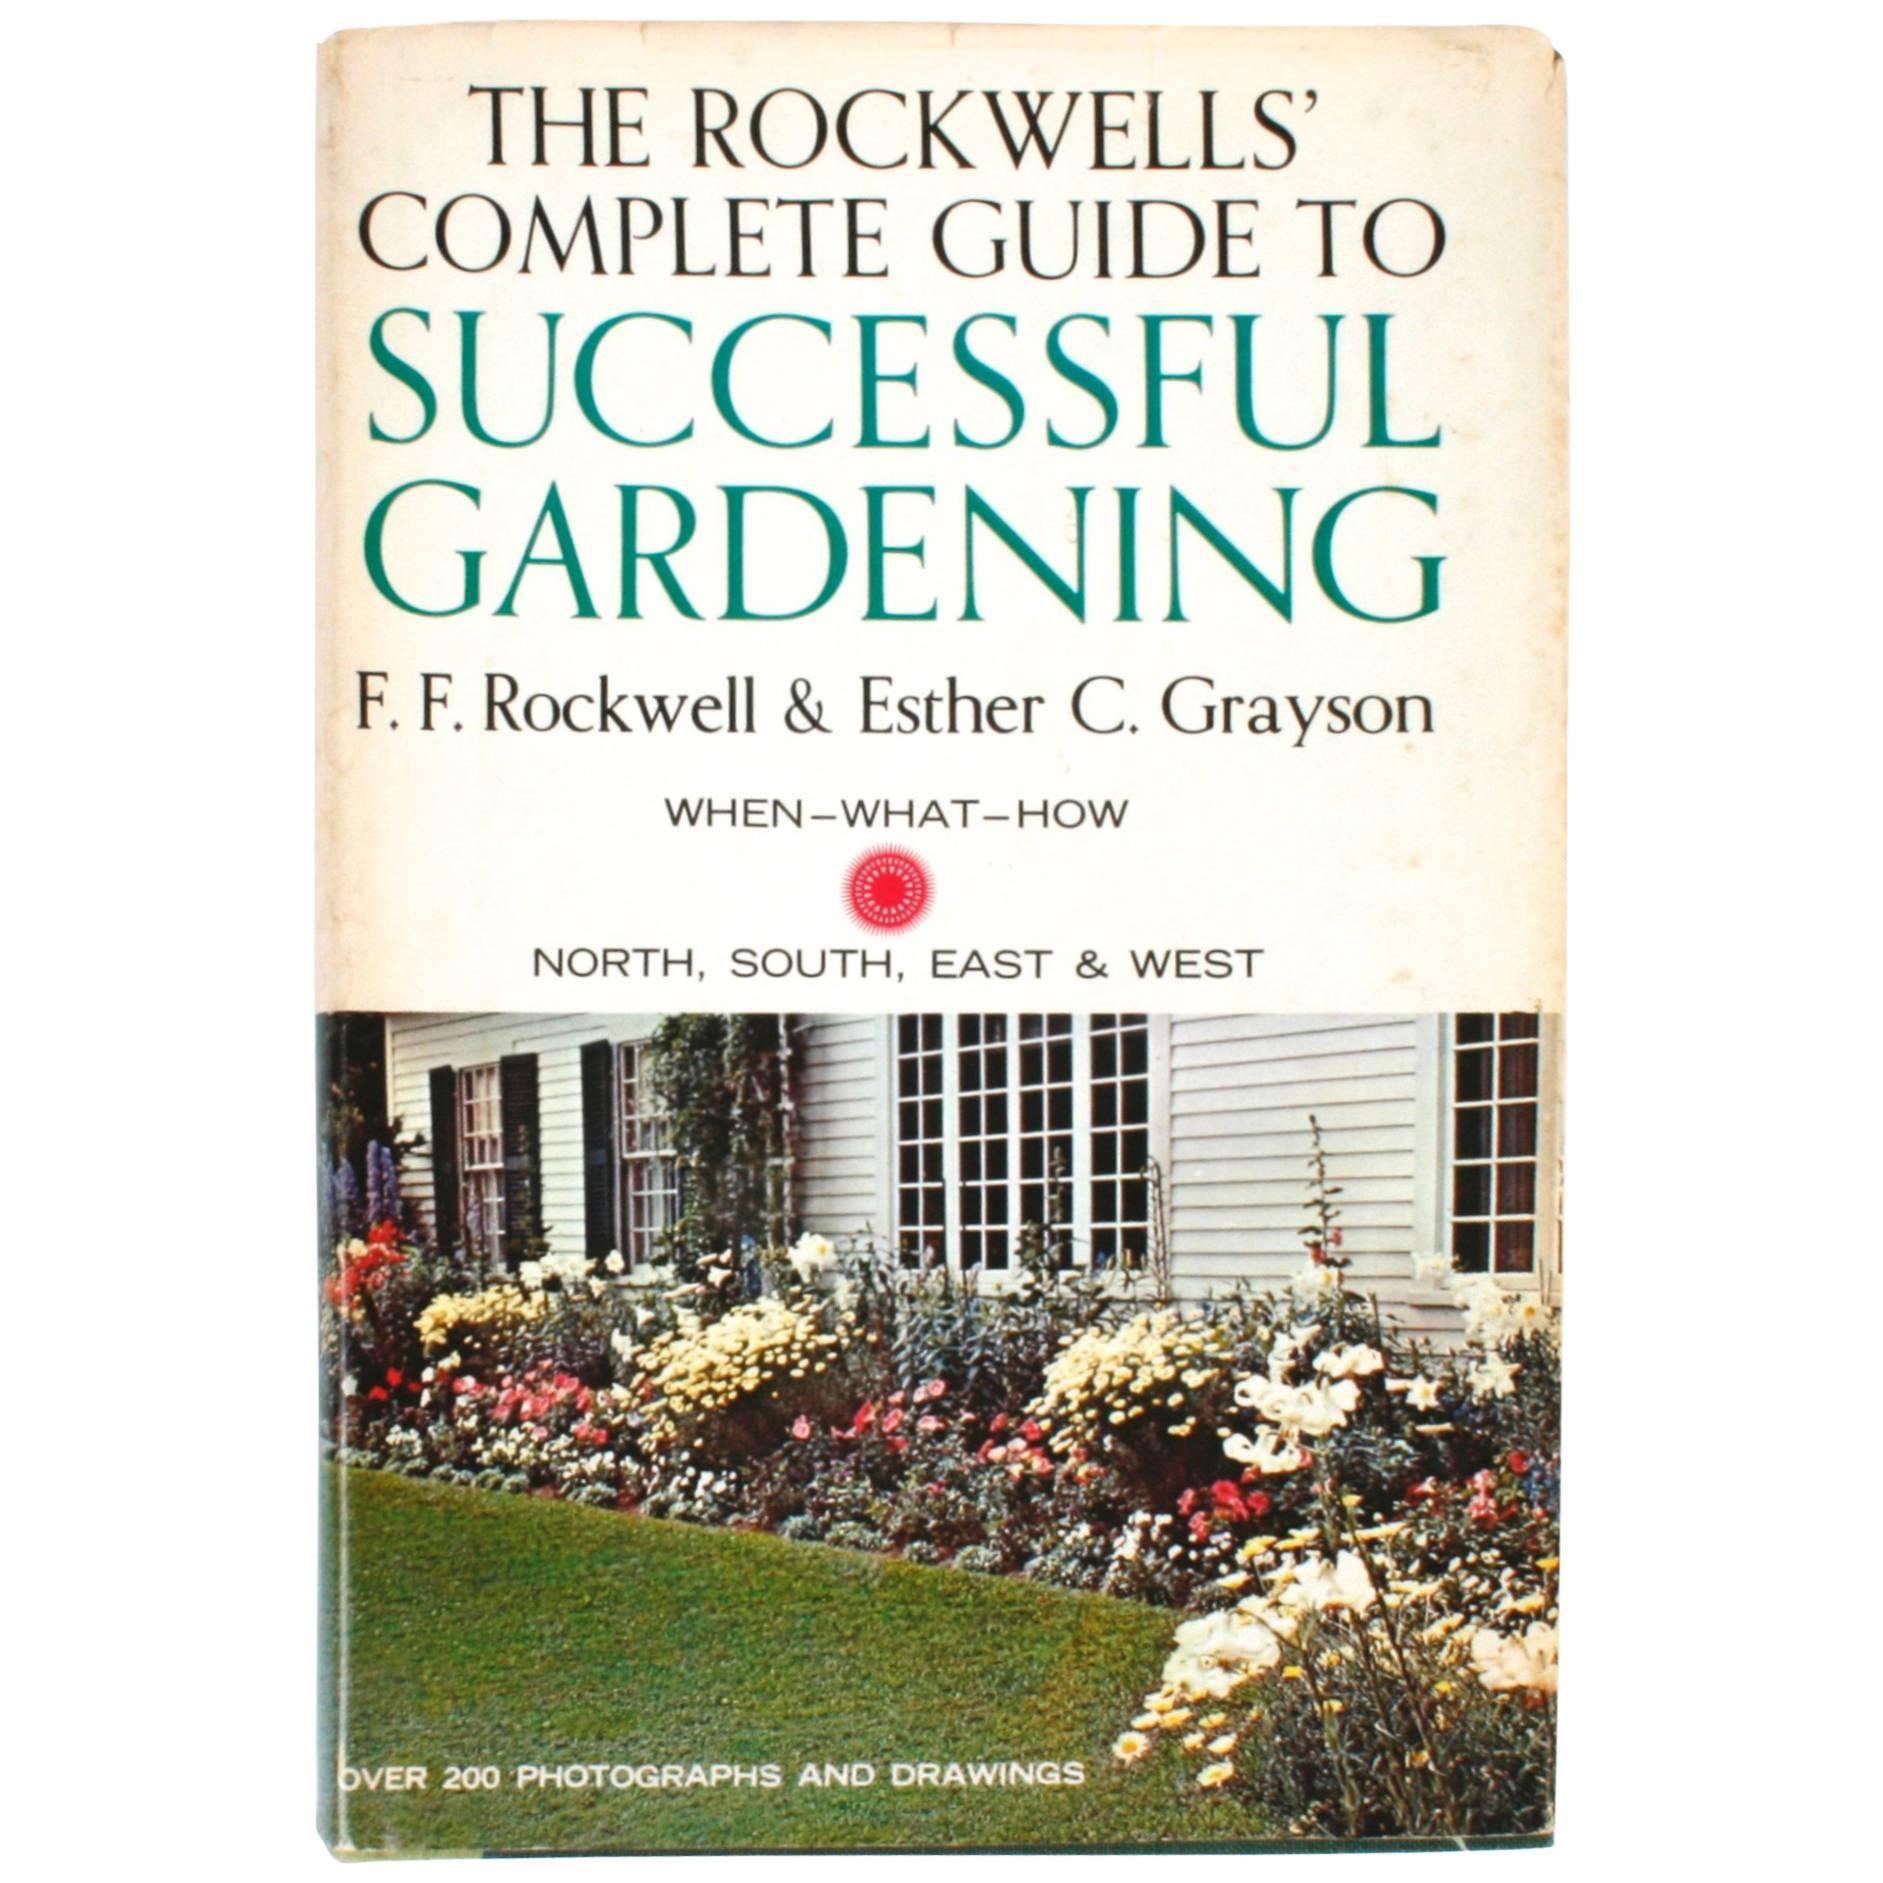 Rockwell's Complete Guide to Successful Gardening